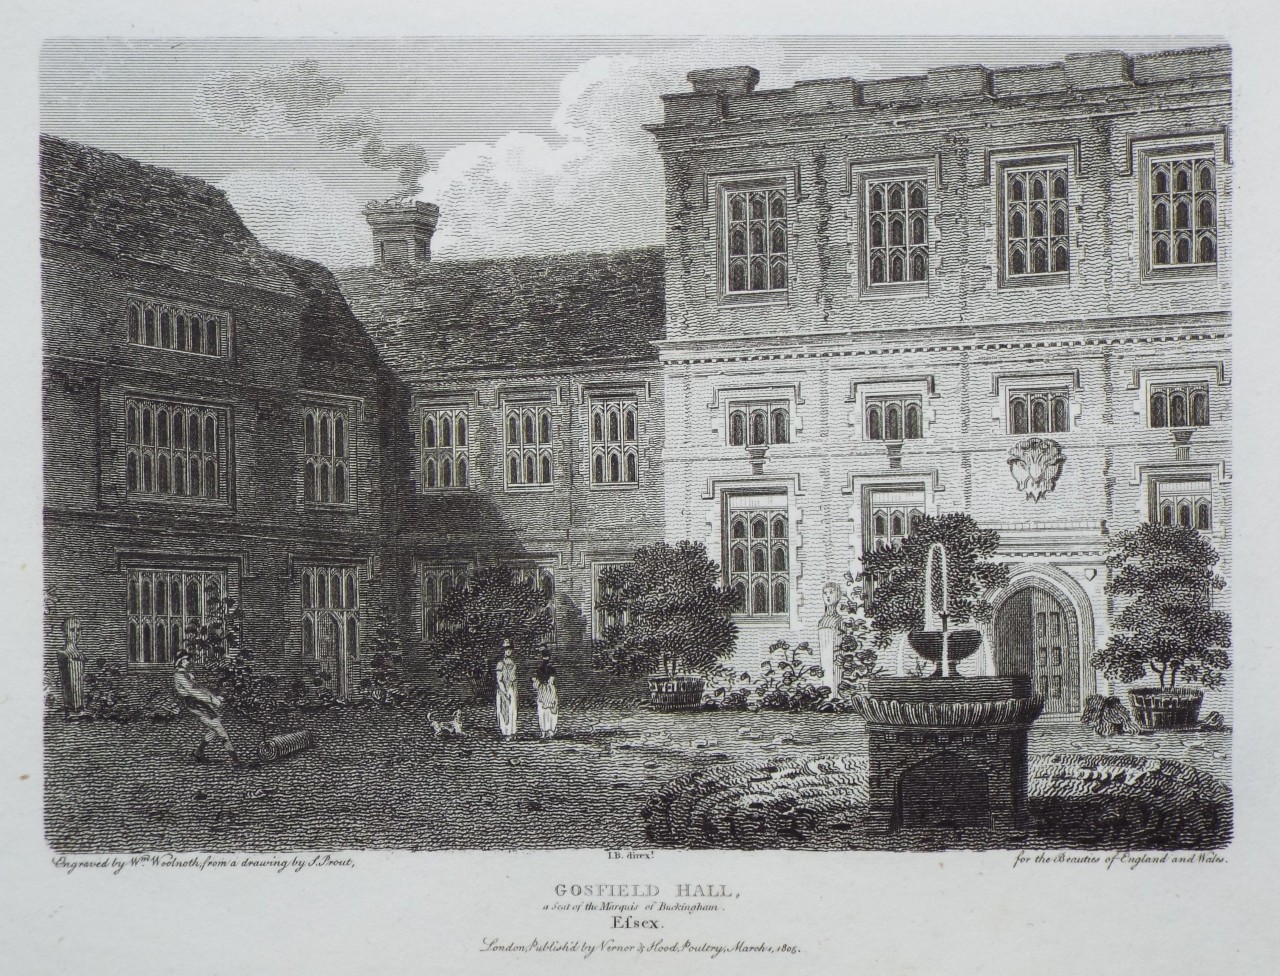 Print - Gosfield Hall, a Seat of the Marquis of Buckingham, Essex. - Woolnoth